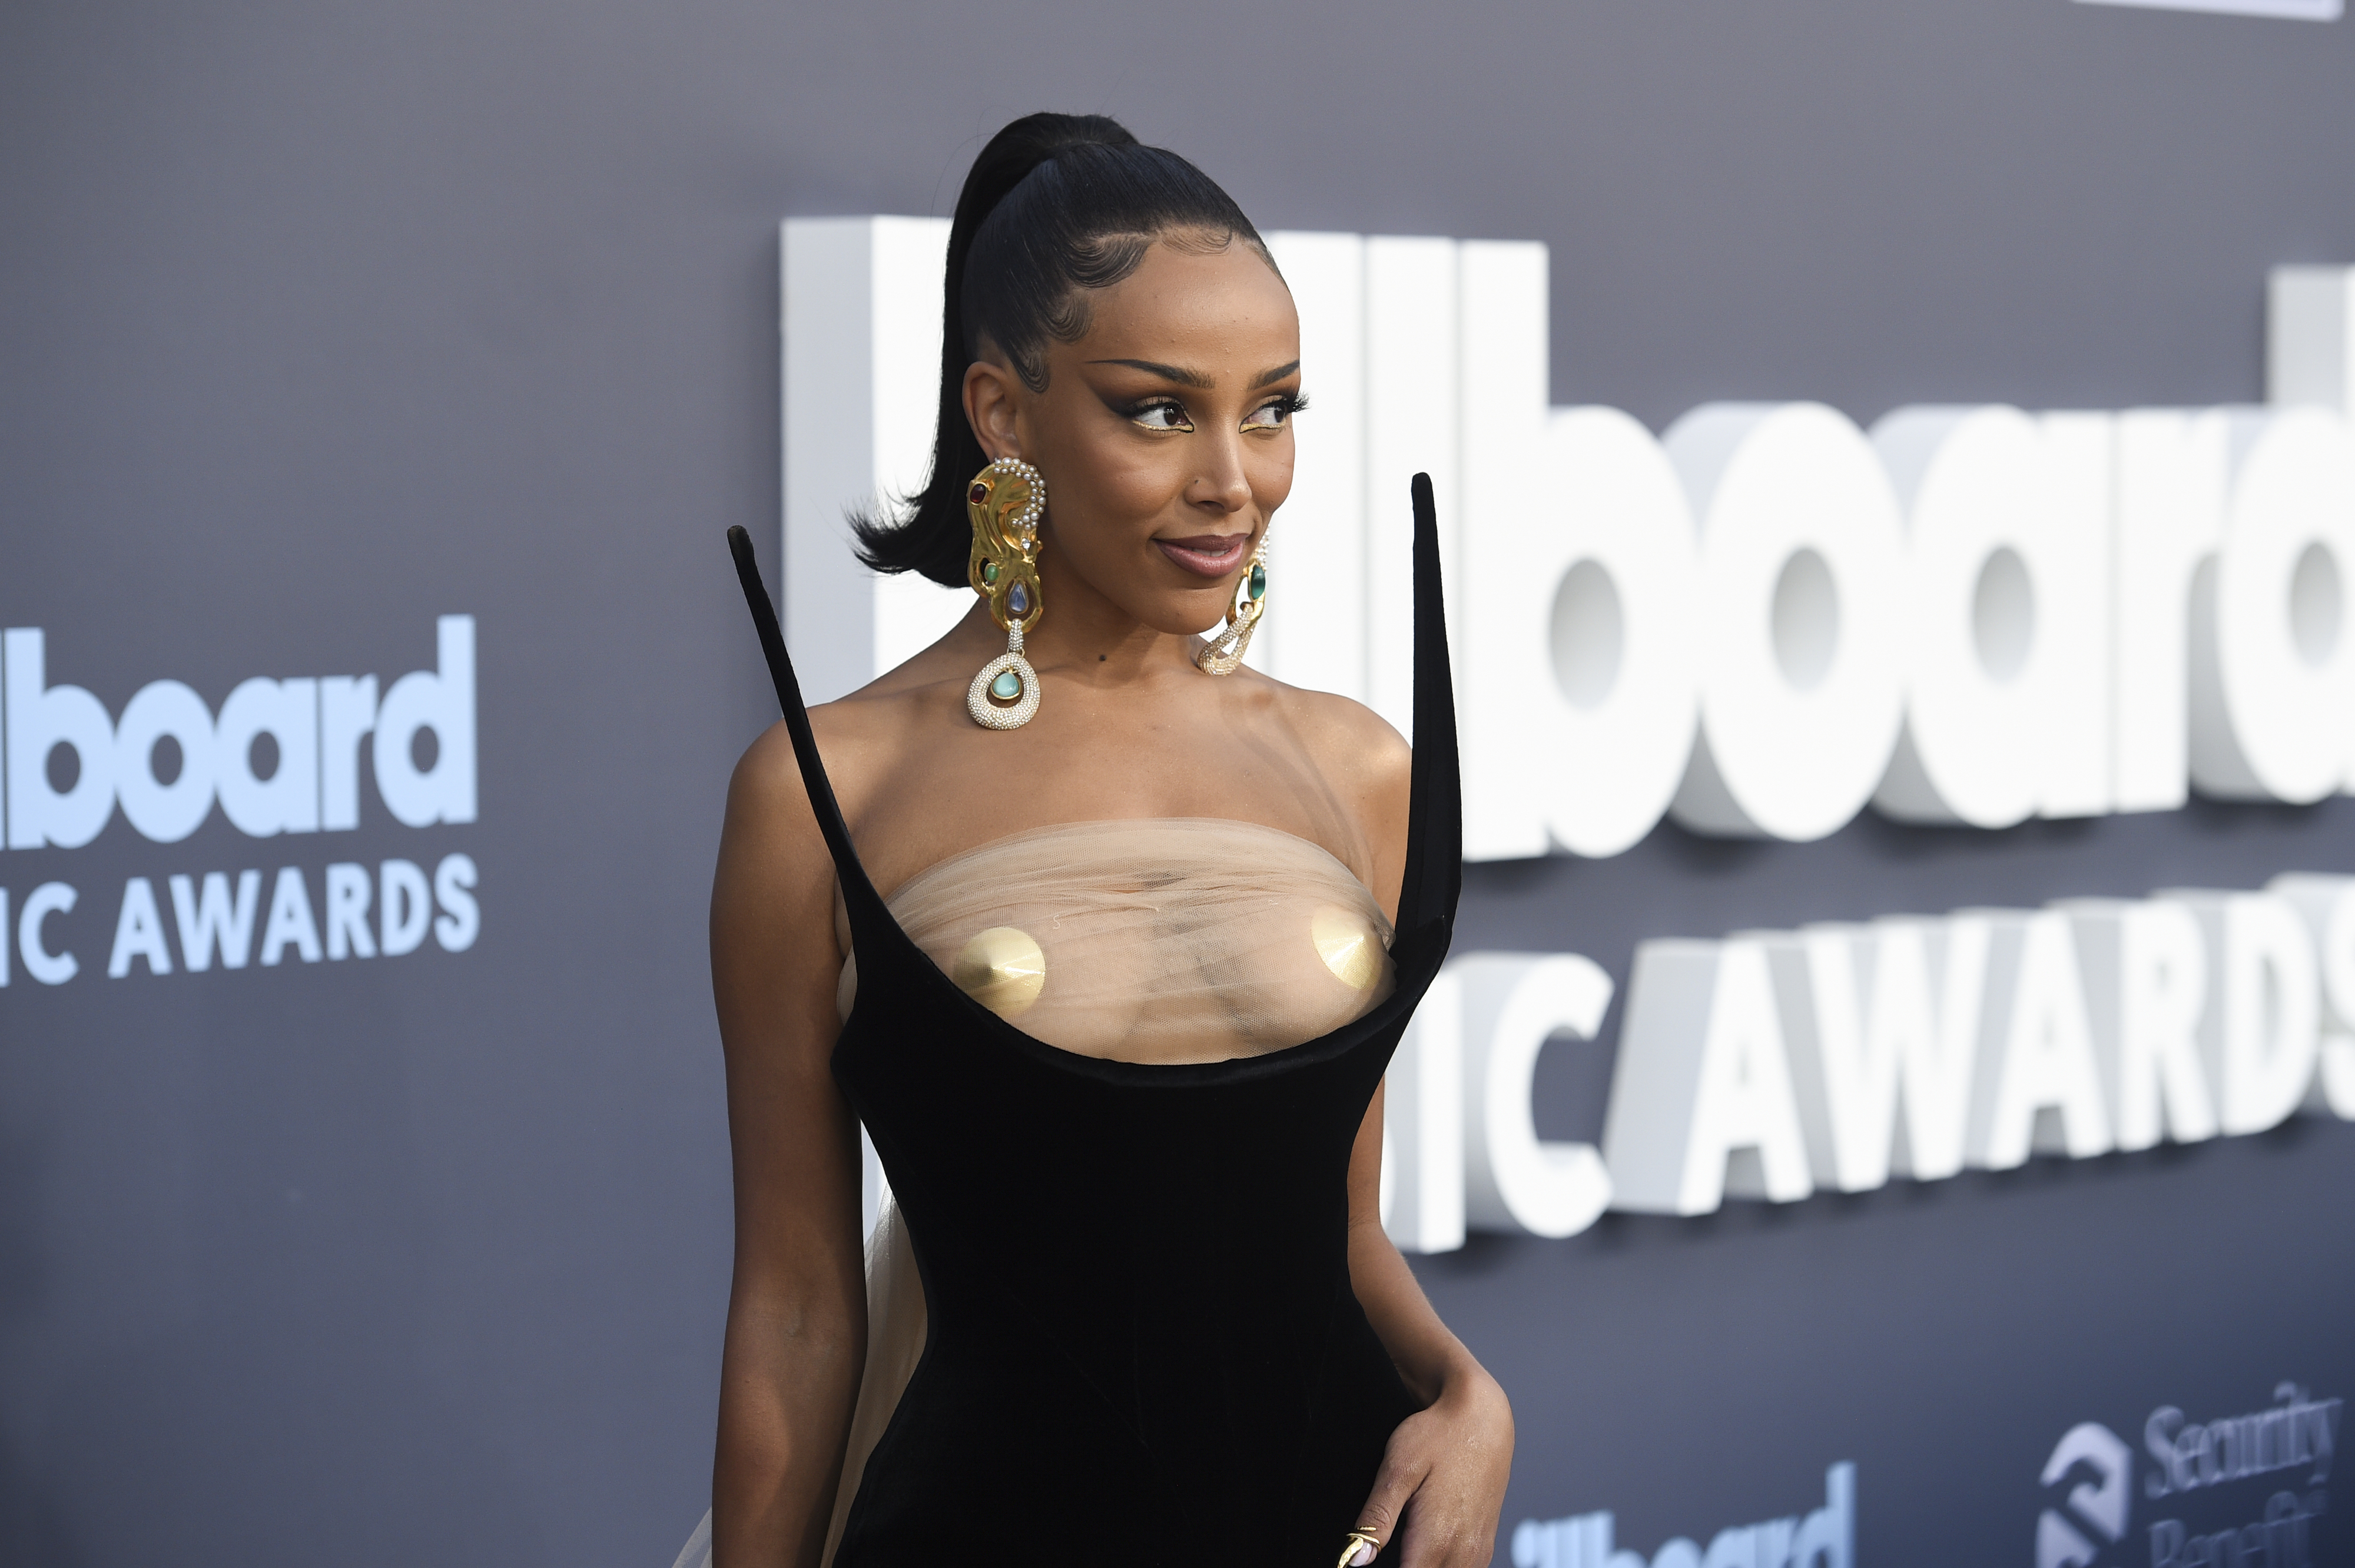 Doja on the Billboard awards red carpet in a architectural strapless dress with a see-through top